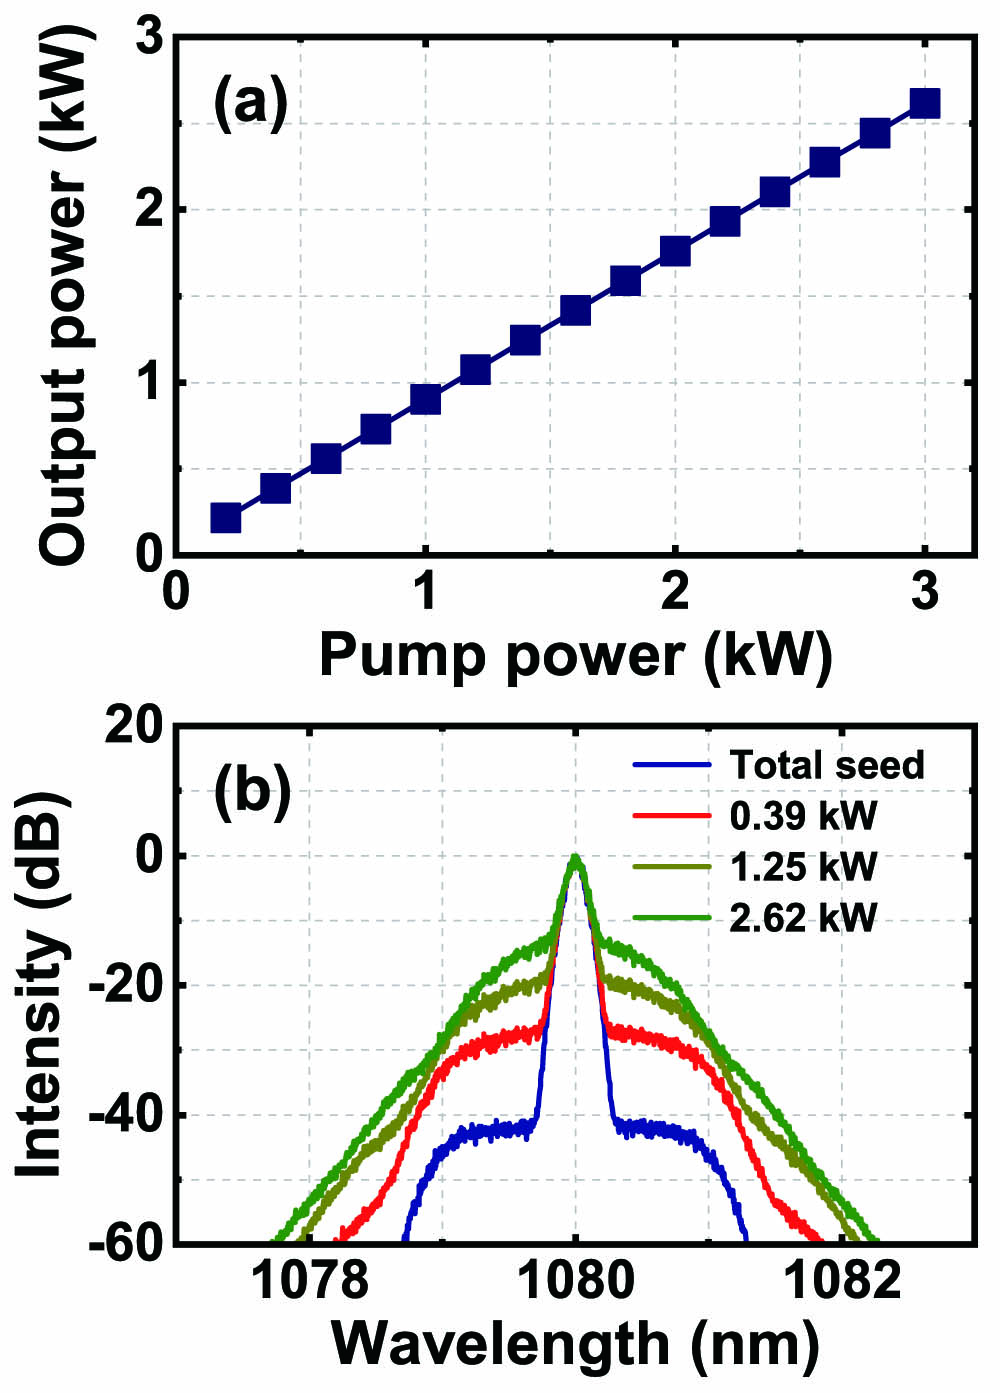 Output powers and spectra of the total signal laser at different pump powers: (a) output power; (b) output spectra.